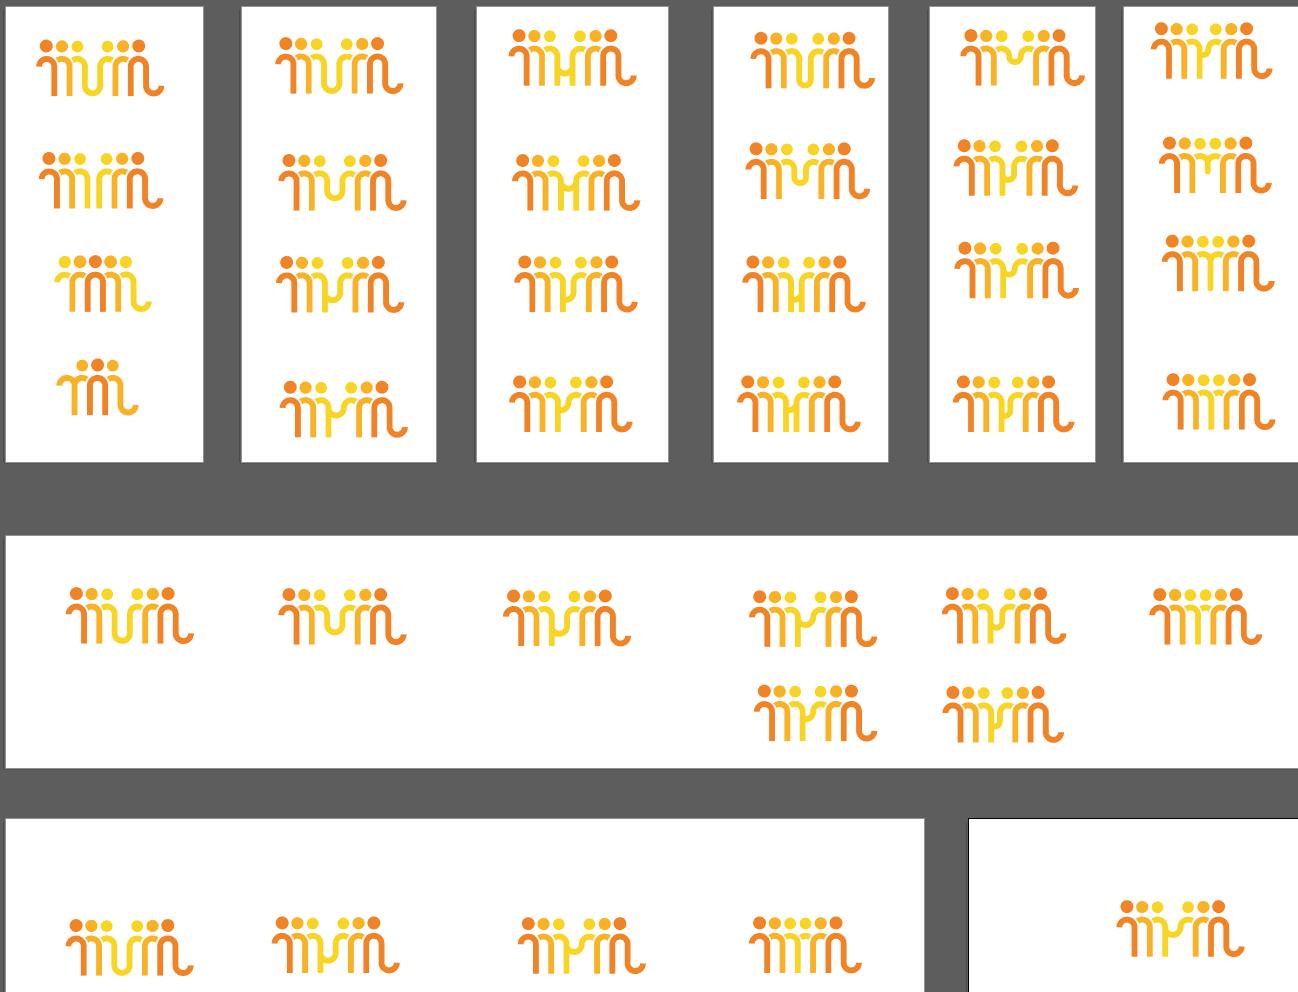 previous iterations of the Mechelen Matcht logo